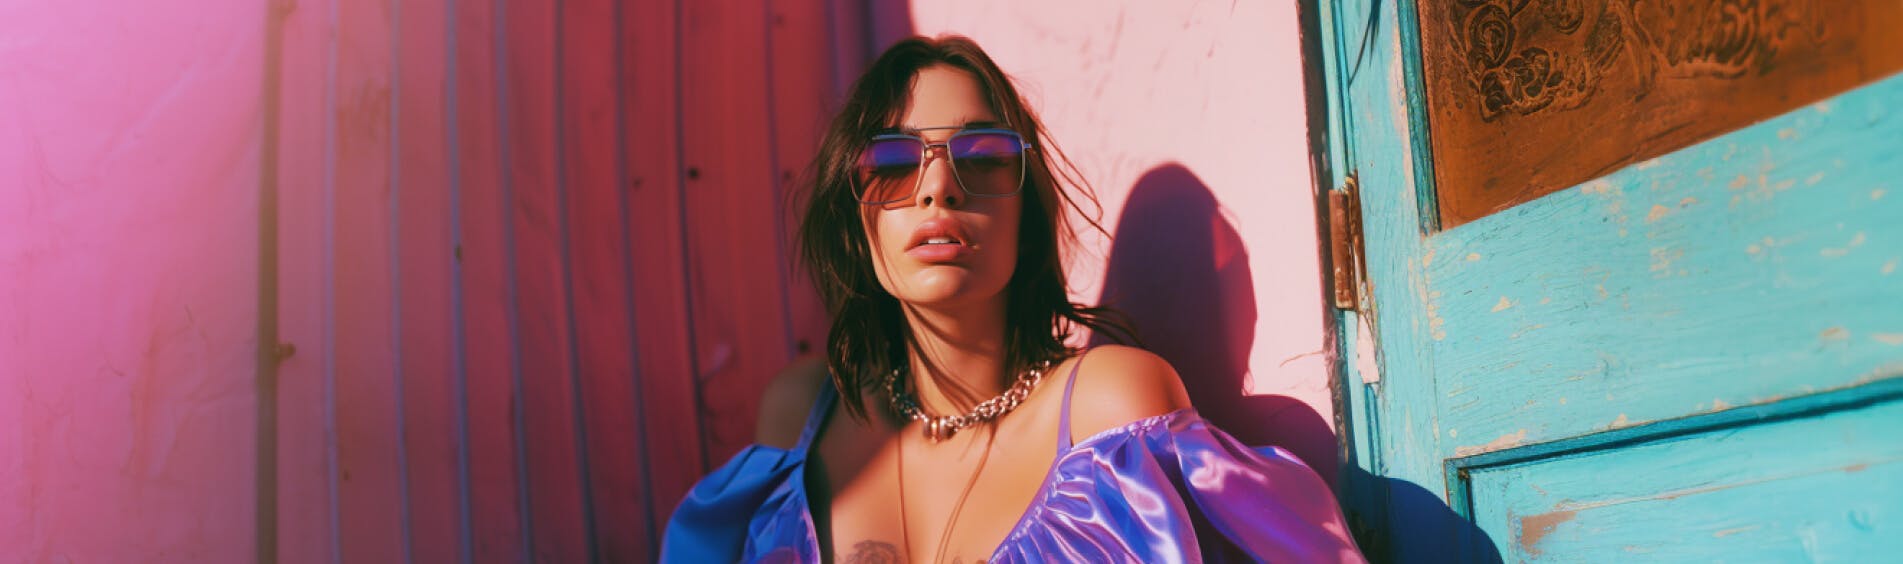 Cover Image for “DOUBLE DUTY DUA” Shares Dua Lipa And Letting Her Fans Know About SNL